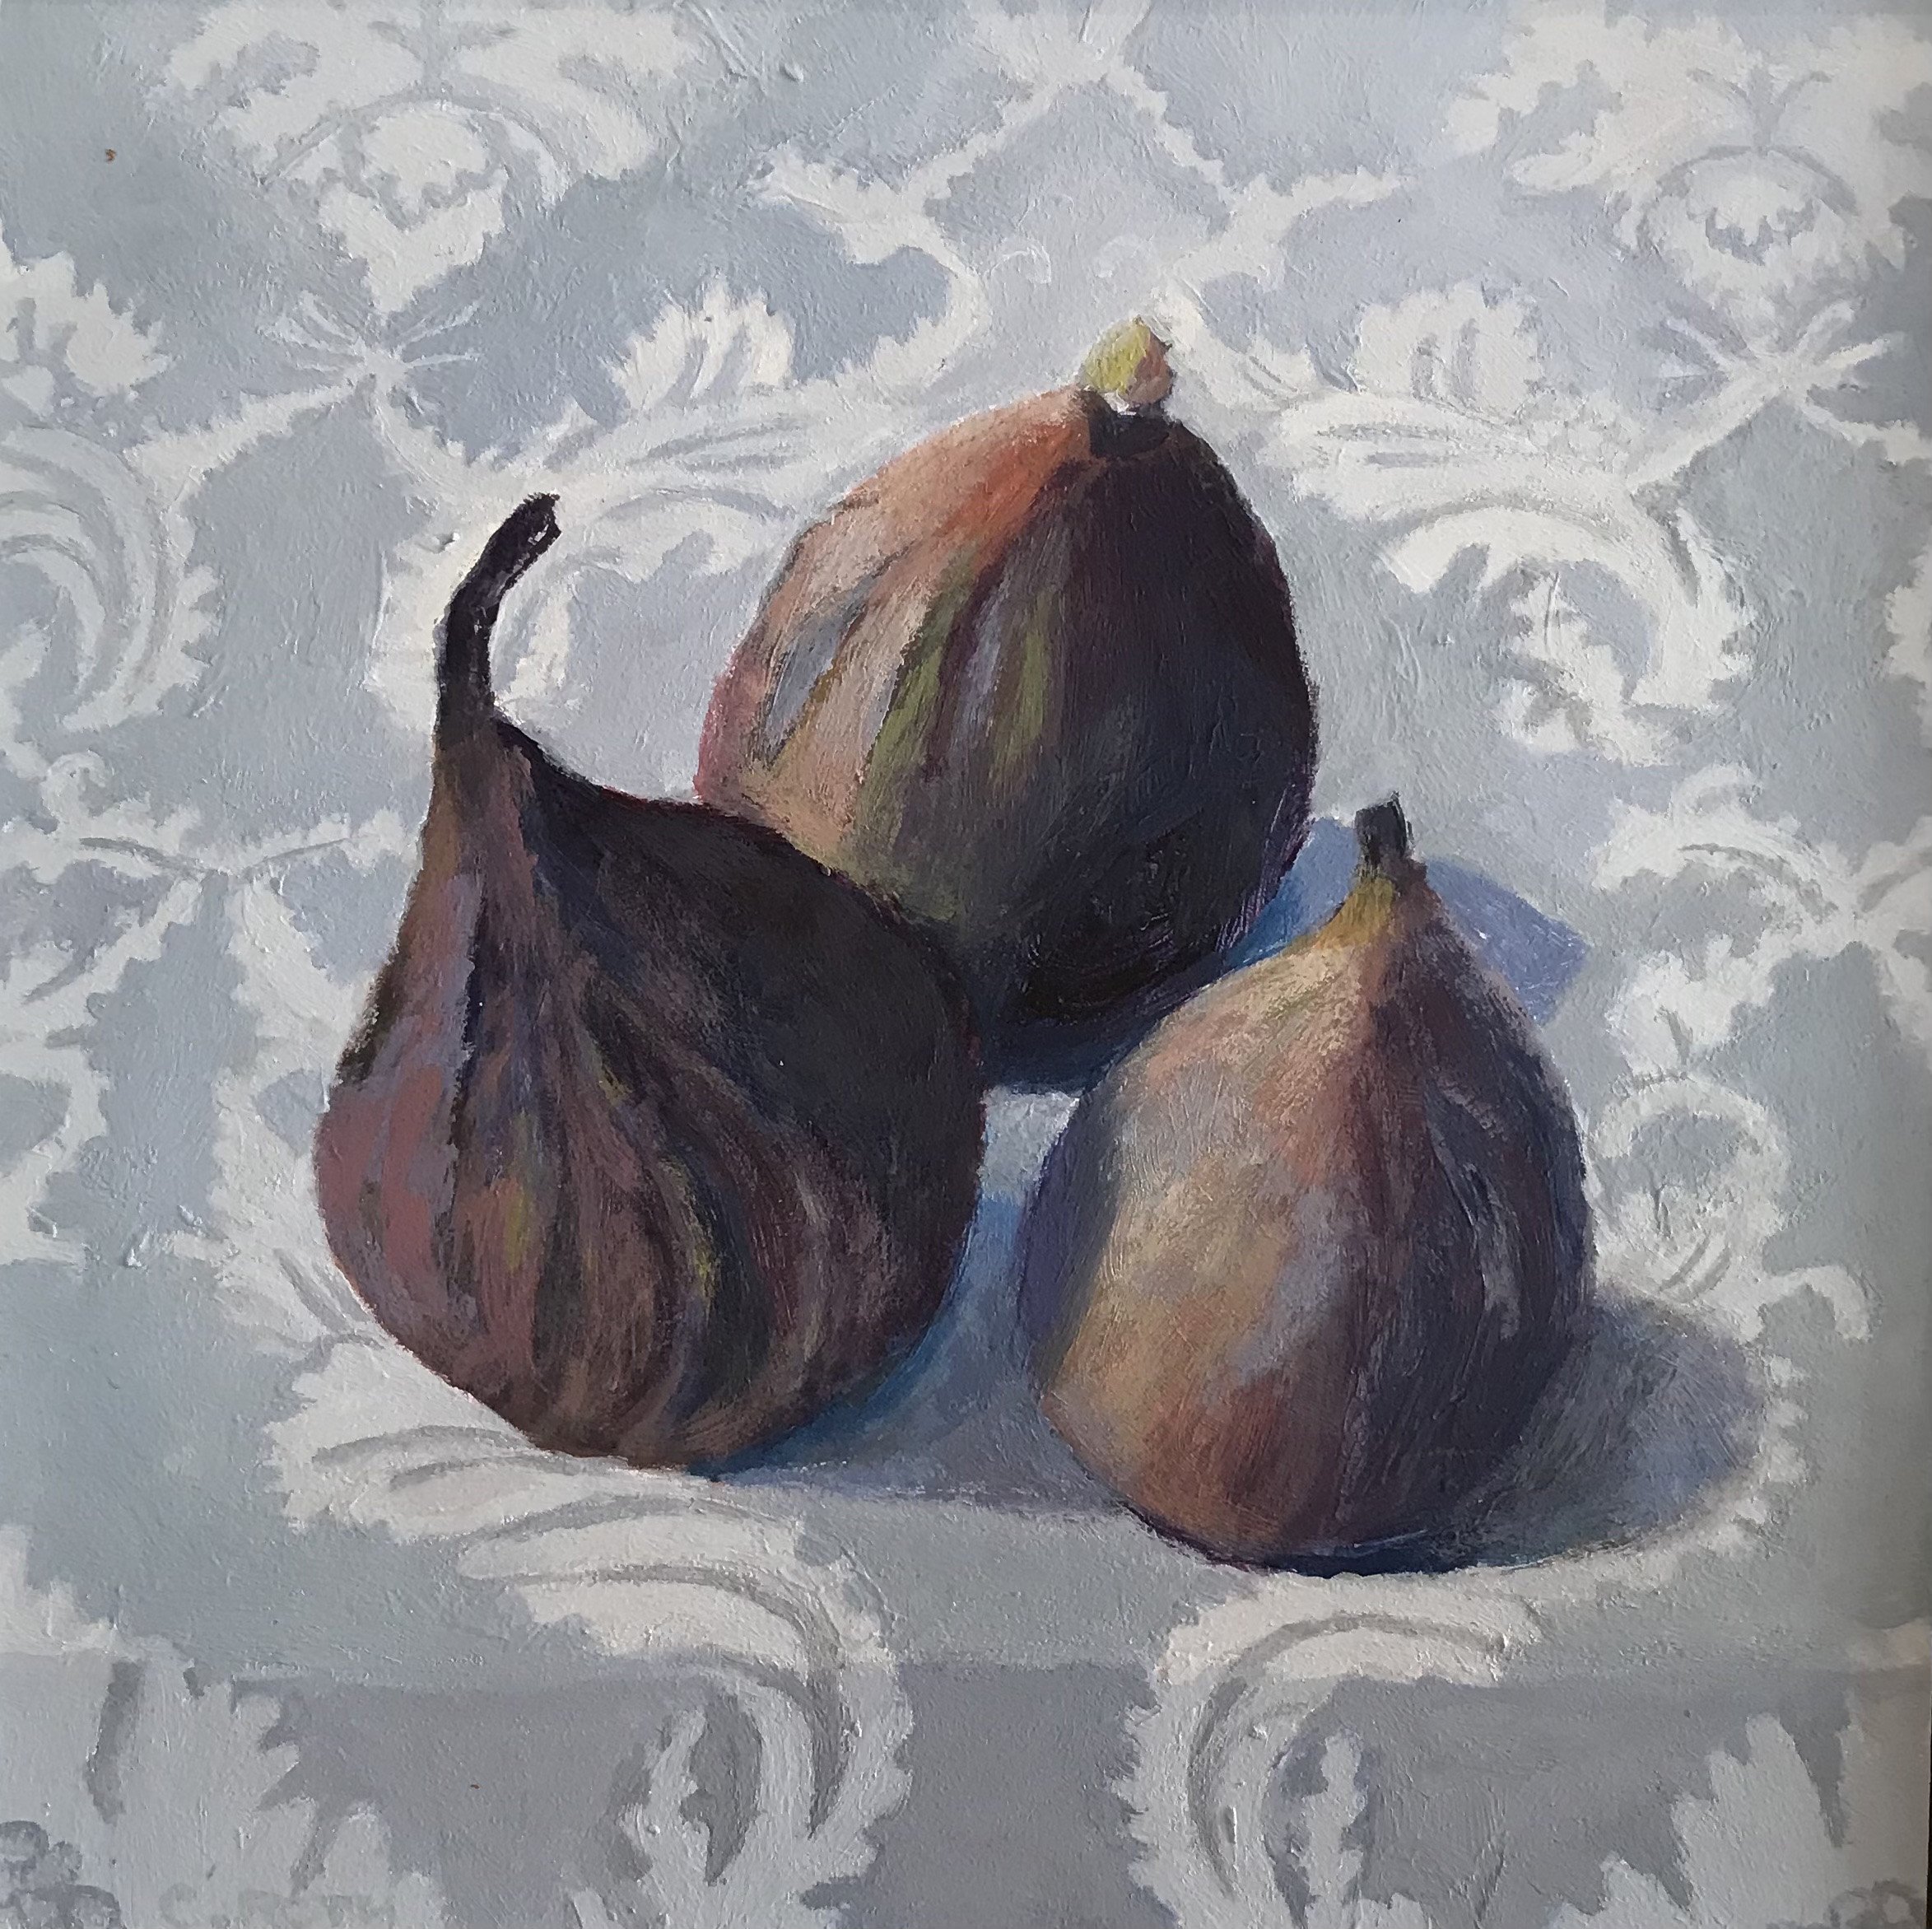 Three Figs on Lace by Carla Roth